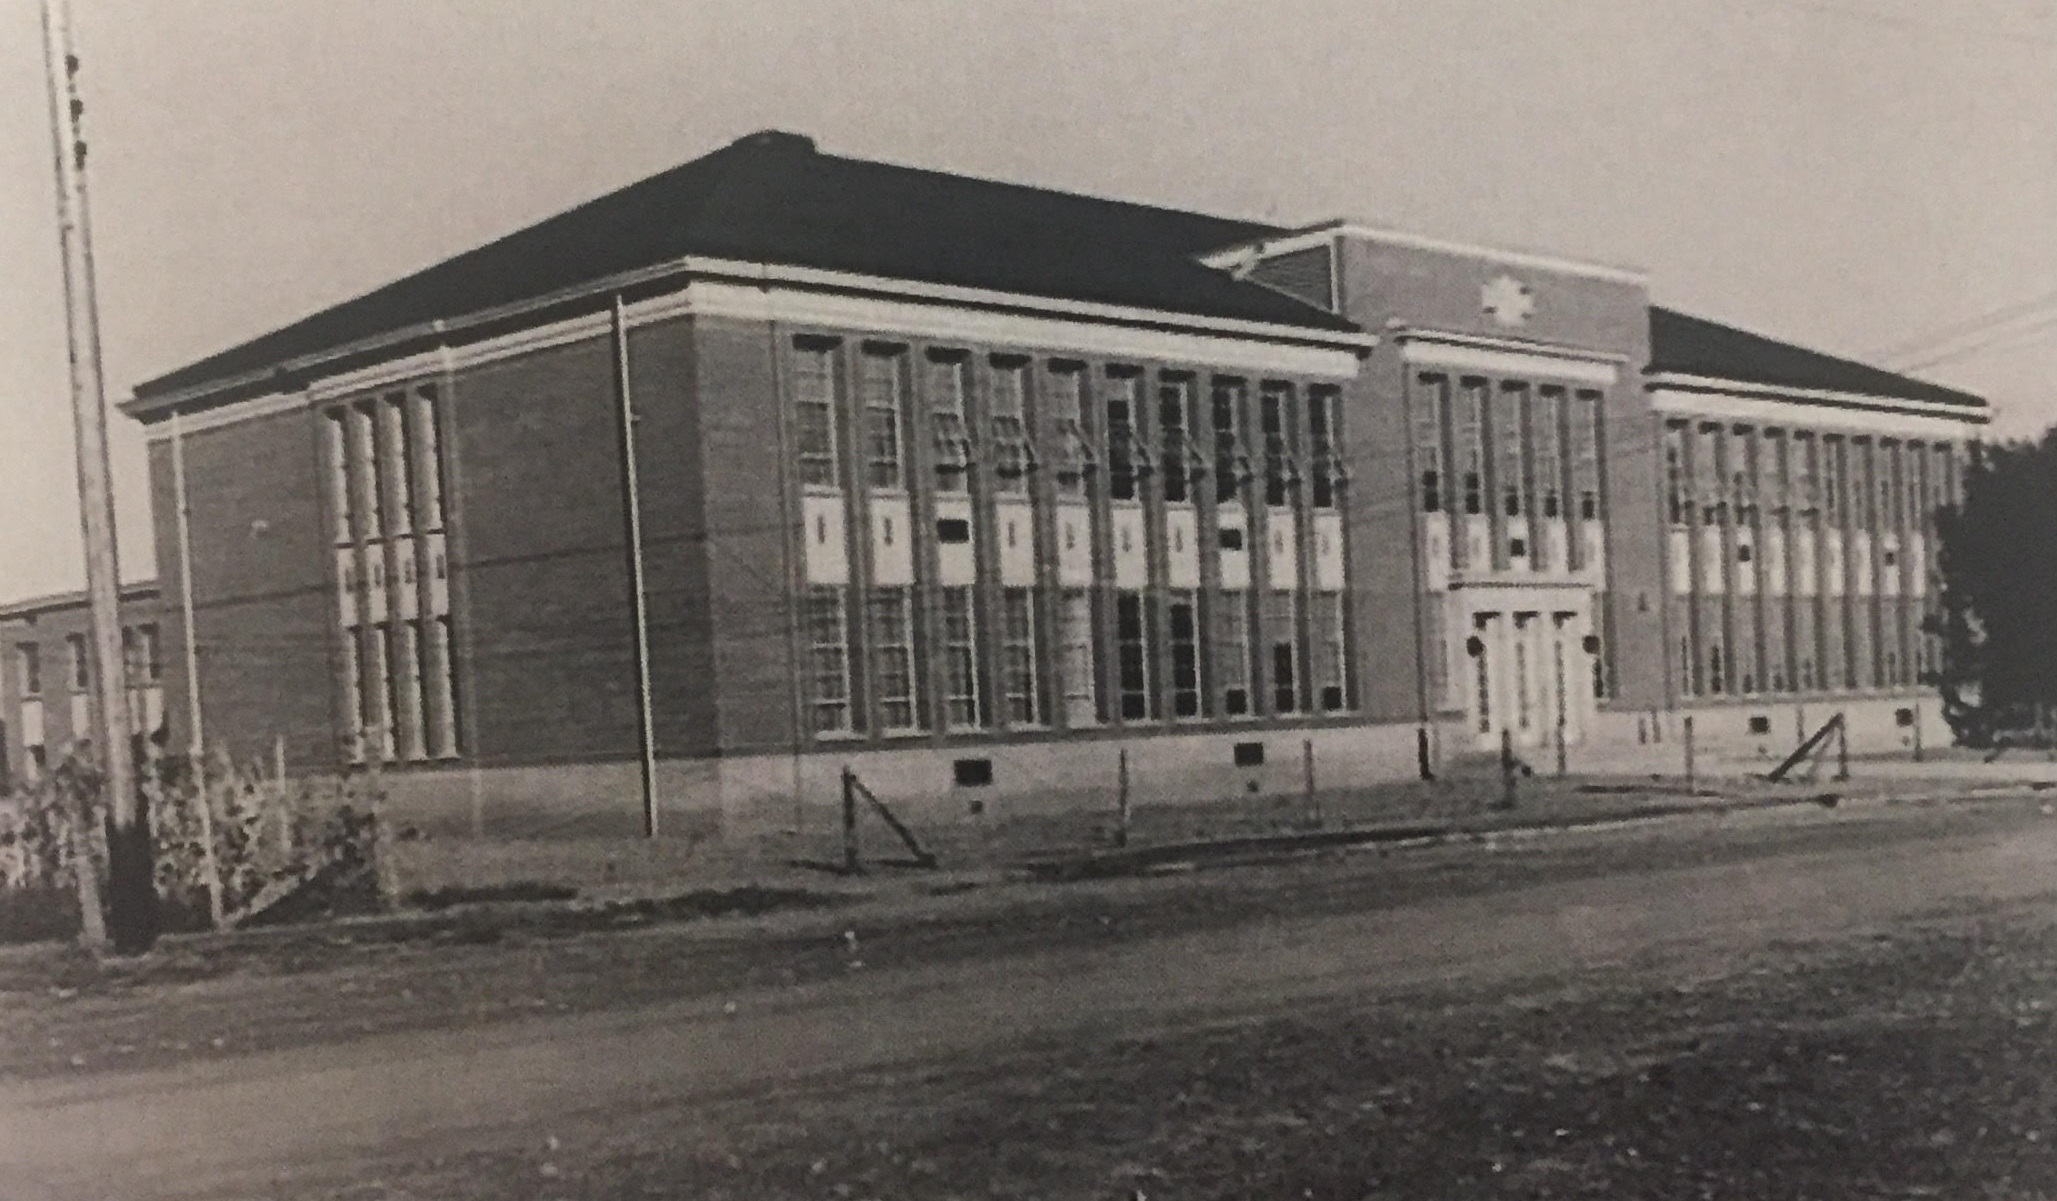 The newly constructed Hurricane High School building about 1936